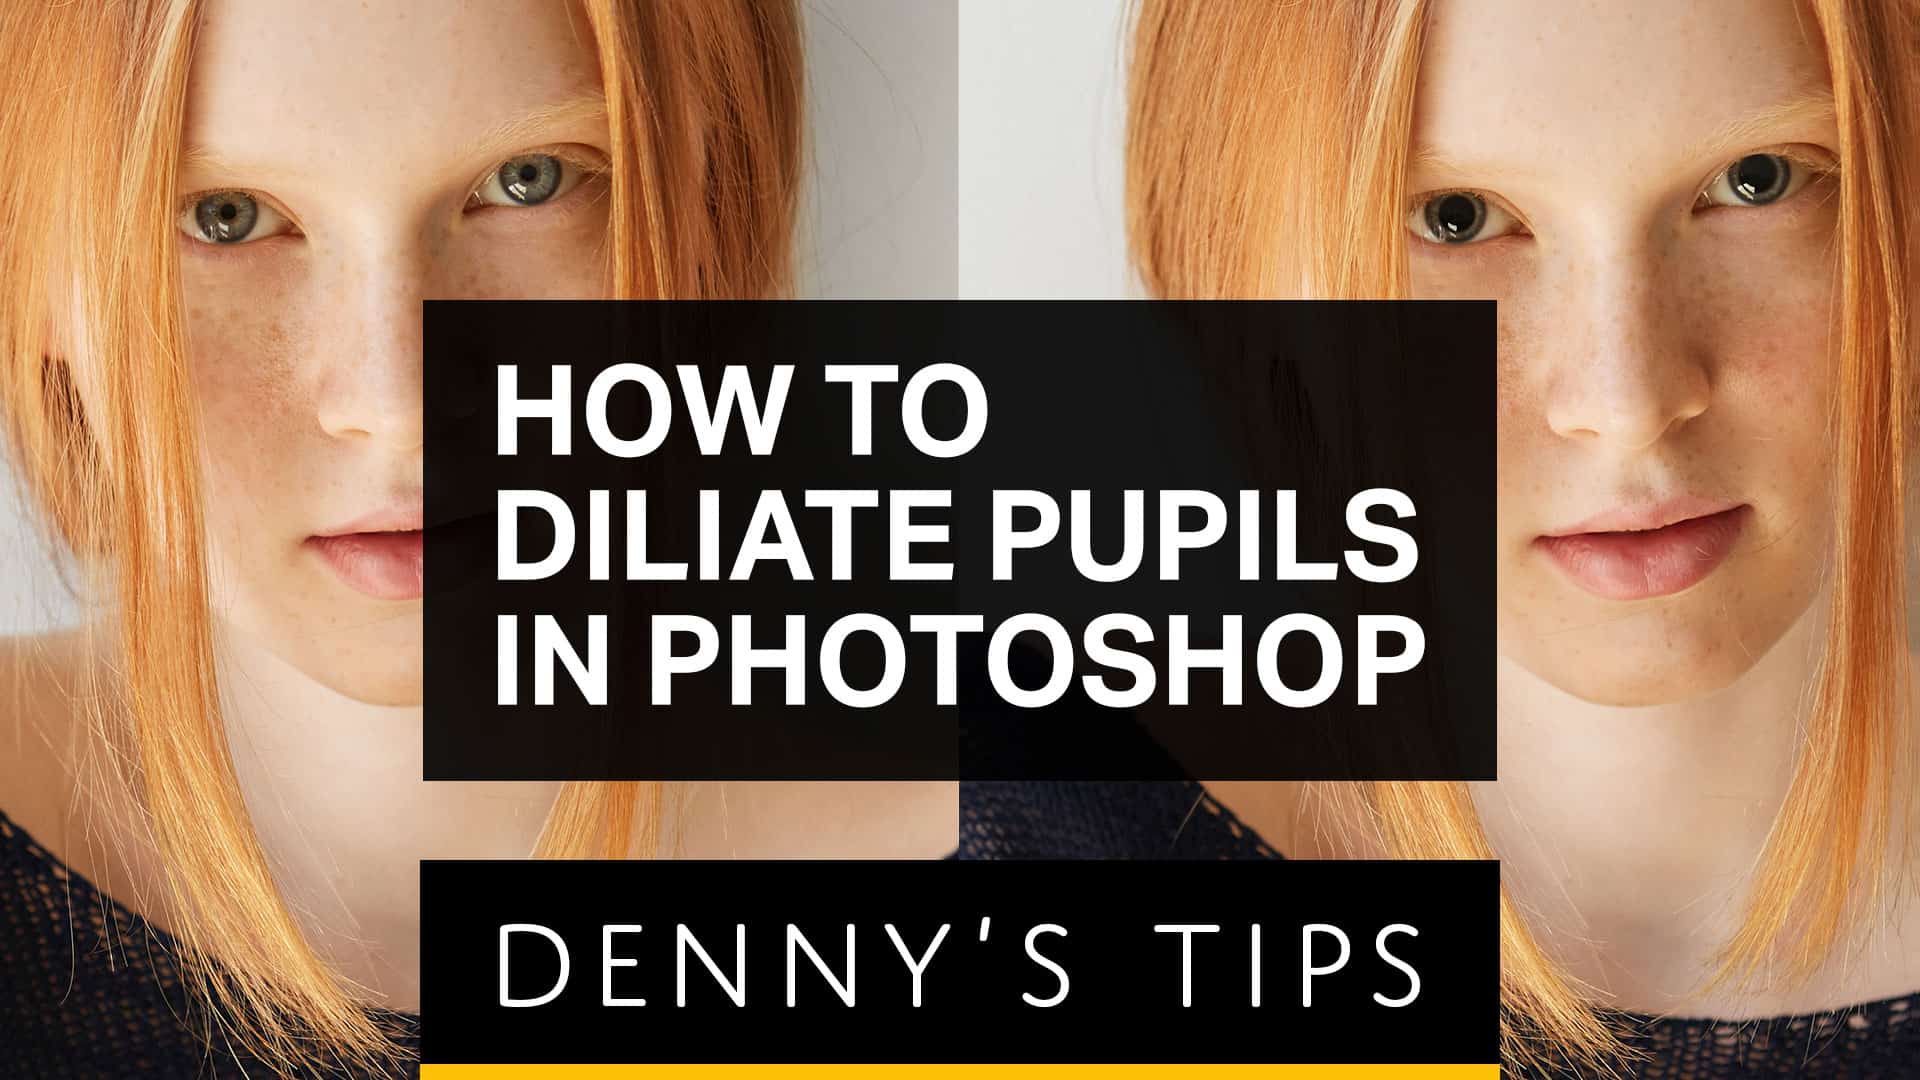 Dilate the Pupils for Better Portraits